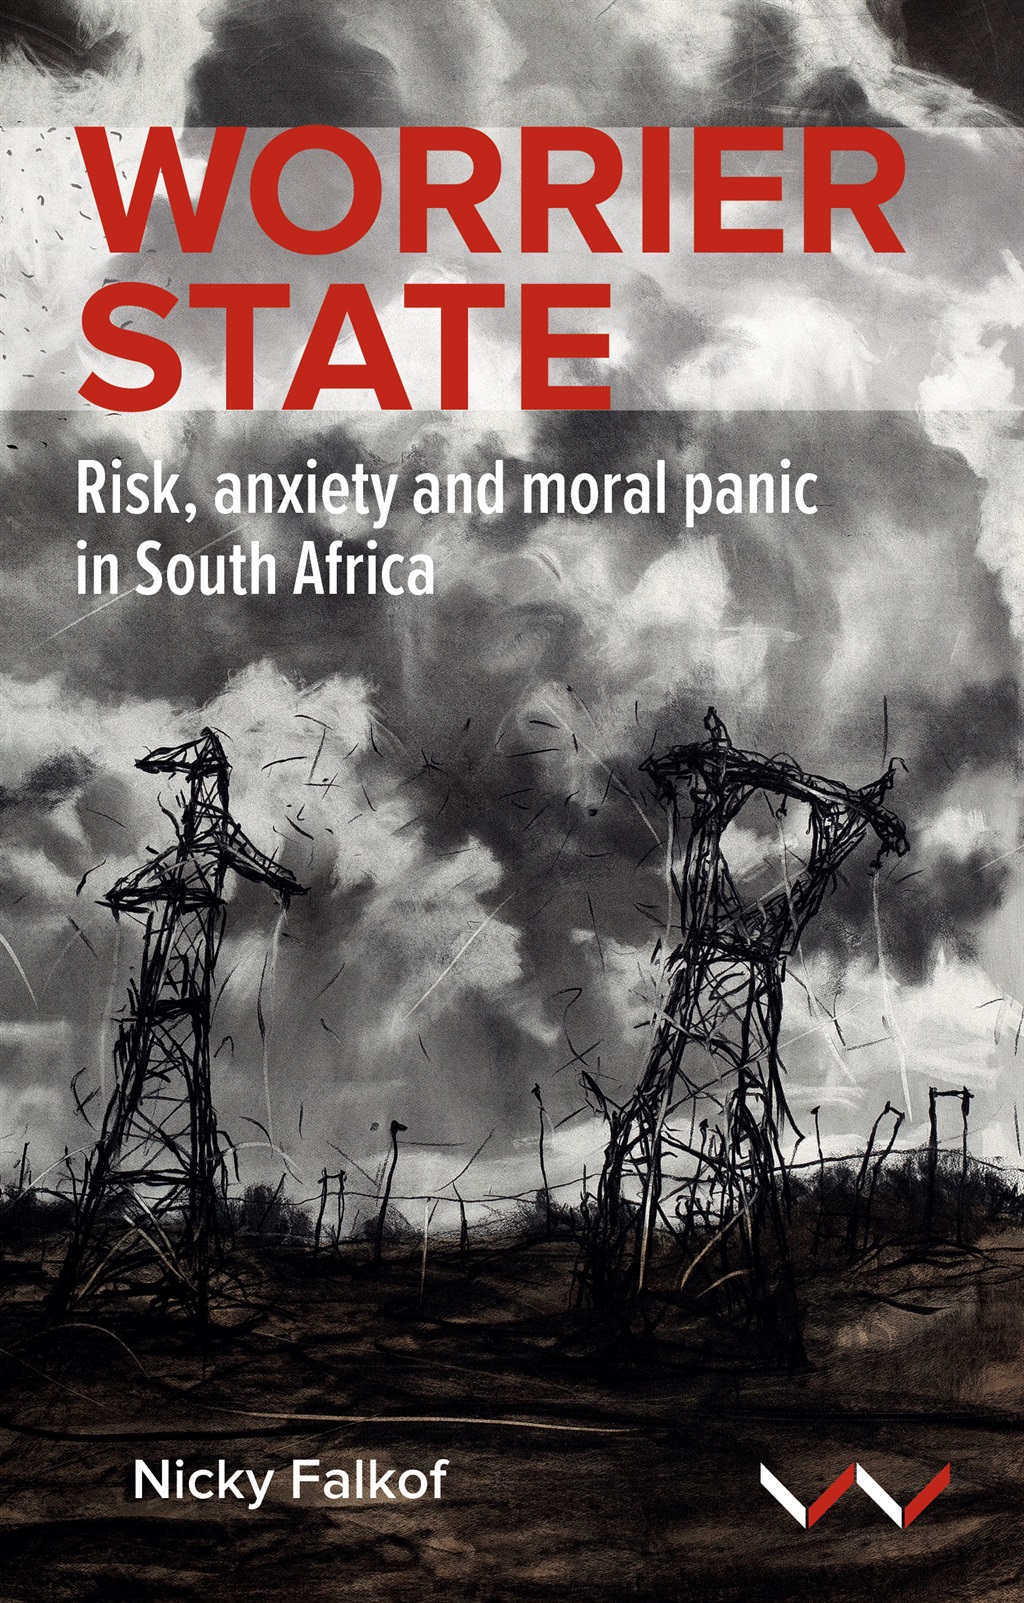 Worrier State: Risk, Anxiety and Moral Panic in South Africa by Nicky Falkof. (Wits University Press)